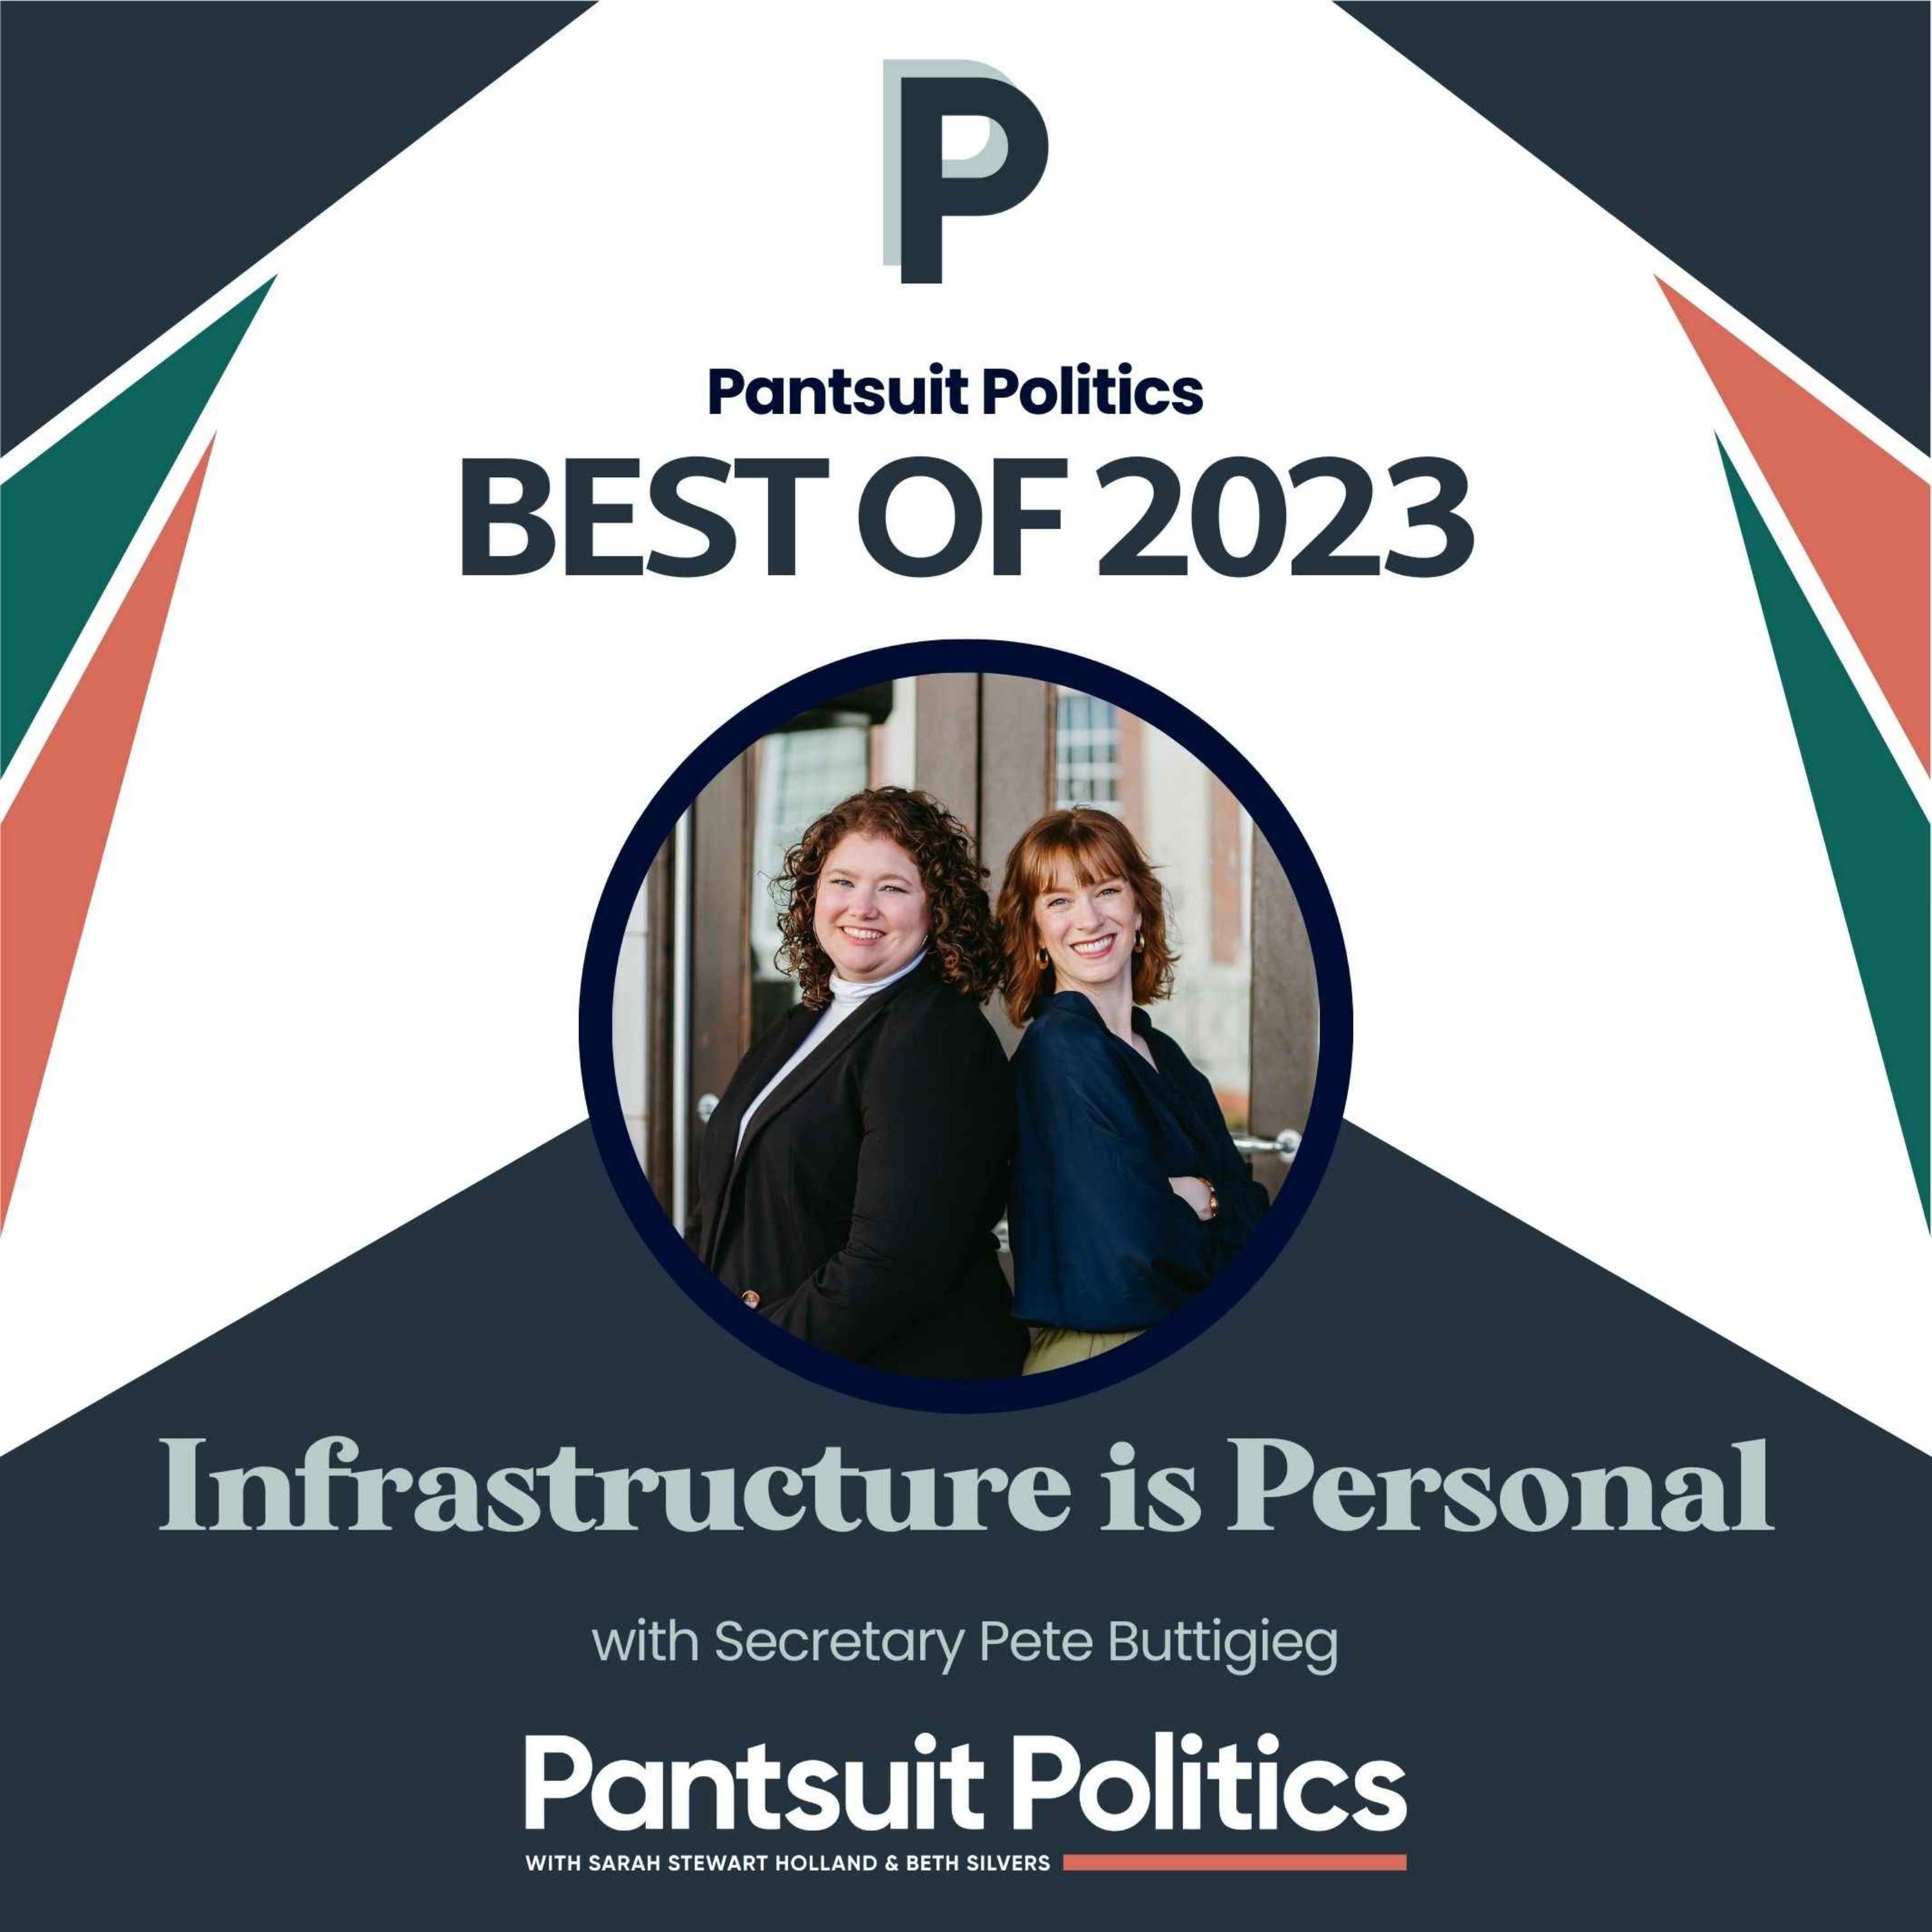 Best of 2023: Infrastructure is Personal with Sec. Pete Buttigieg